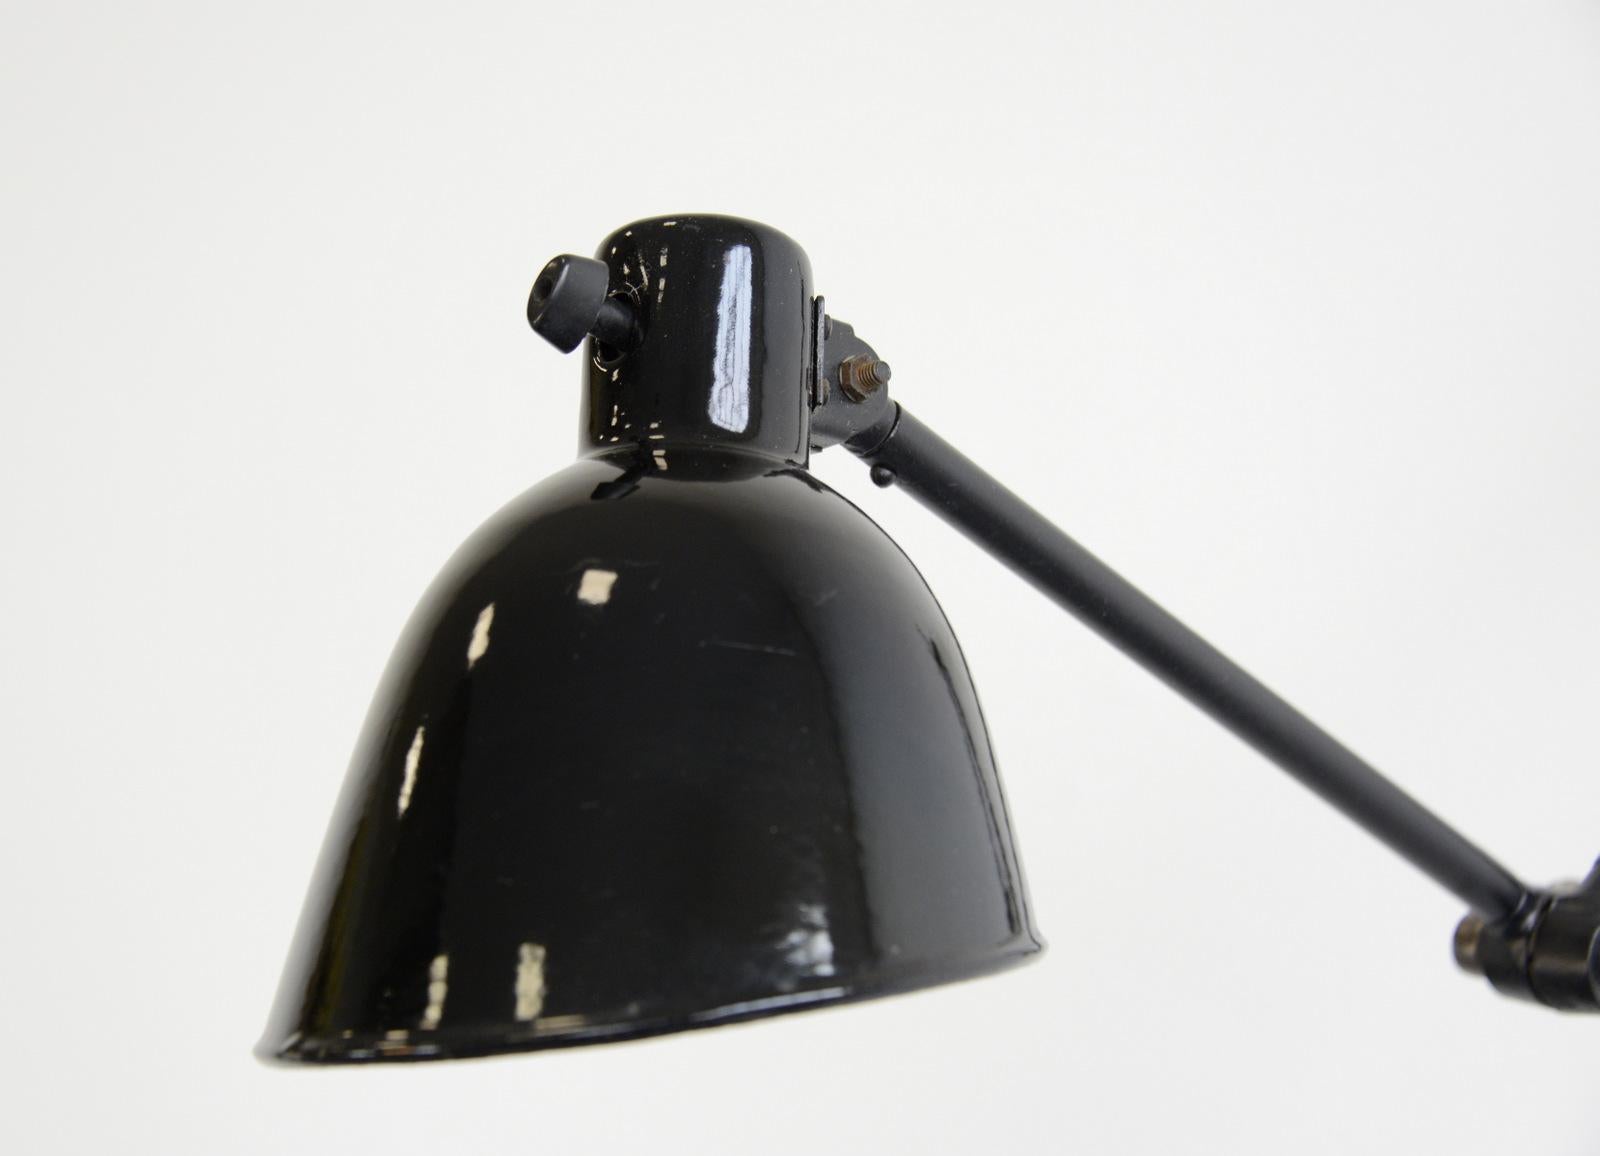 Wall-mounted task lamp by Kandem, circa 1930s

- All prices inc UK shipping
- Vitreous black enamel shade
- On/Off toggle switch on the shade
- Adjustable arms
- Takes E27 fitting bulbs
- Cast iron wall bracket
- Made by Korting & Mathiesen,